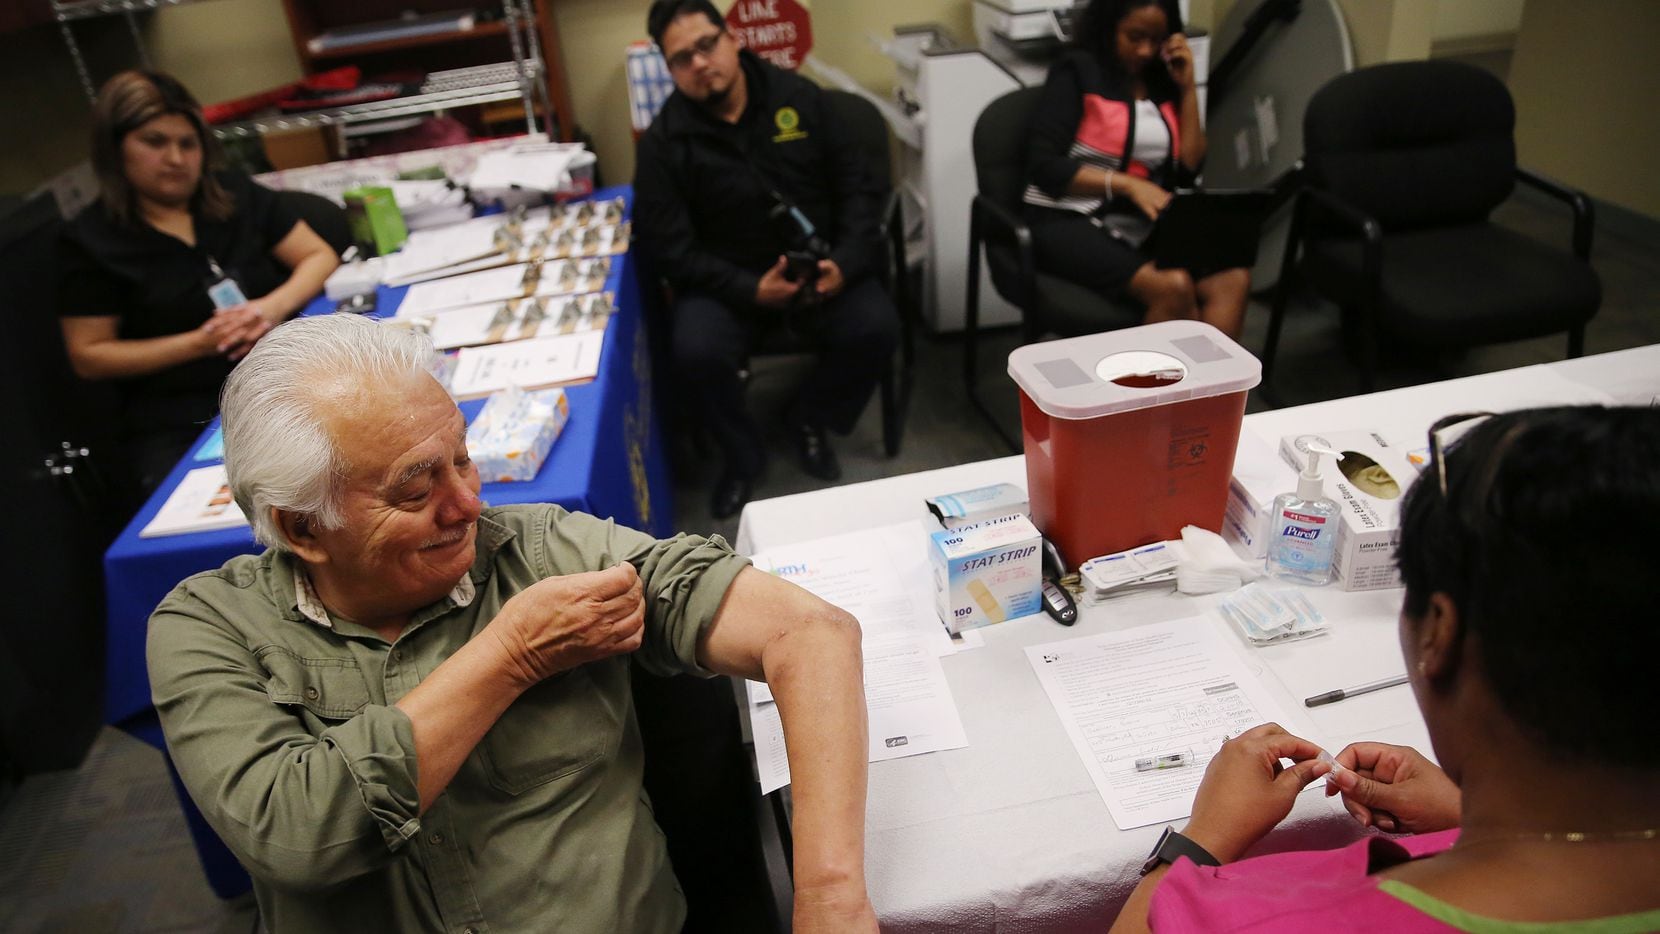 Gavino Saldivar of DeSoto lifts his sleeve up before receiving an influenza vaccine from Barbara Davis, a registered nurse, at a mobile immunization clinic hosted by Dallas County Health and Human Services at the DeSoto Senior Center in DeSoto Feb. 20, 2018.